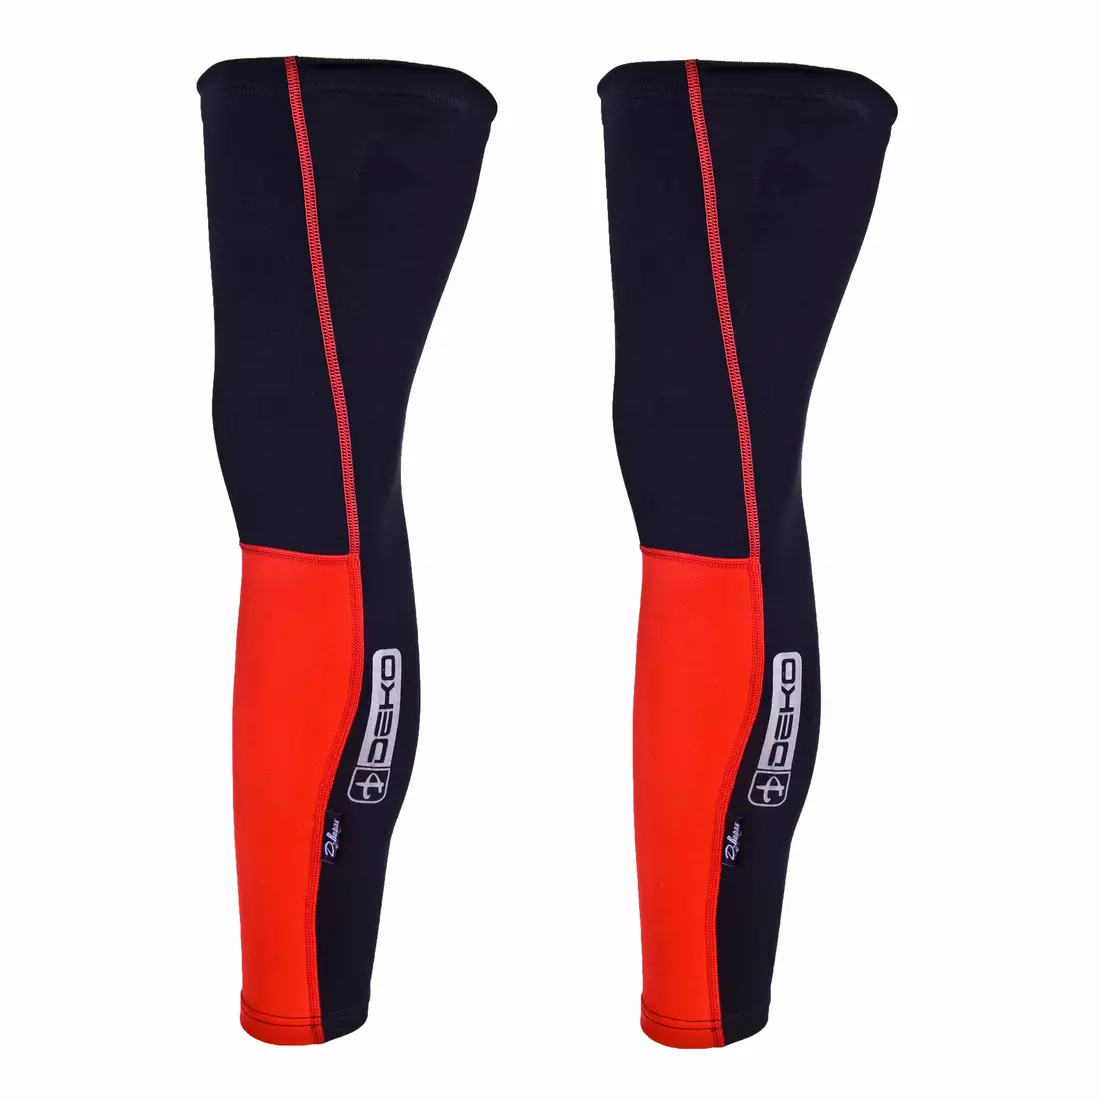 DEKO DUAL D-ROBAX insulated cycling trousers, black and red